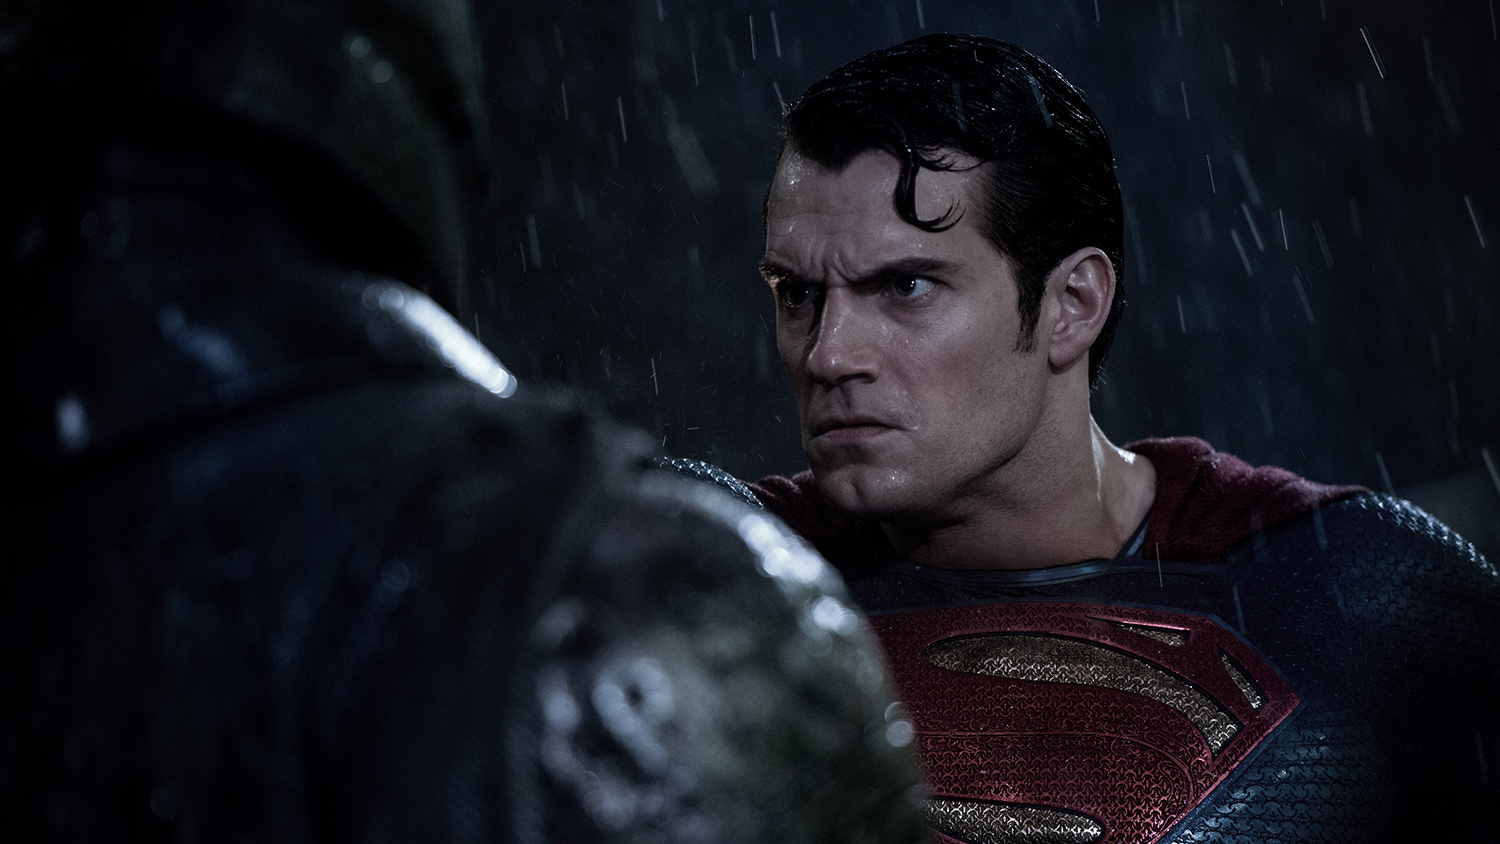 See Henry Cavill In Classic Superman Suit For Man Of Steel Audition